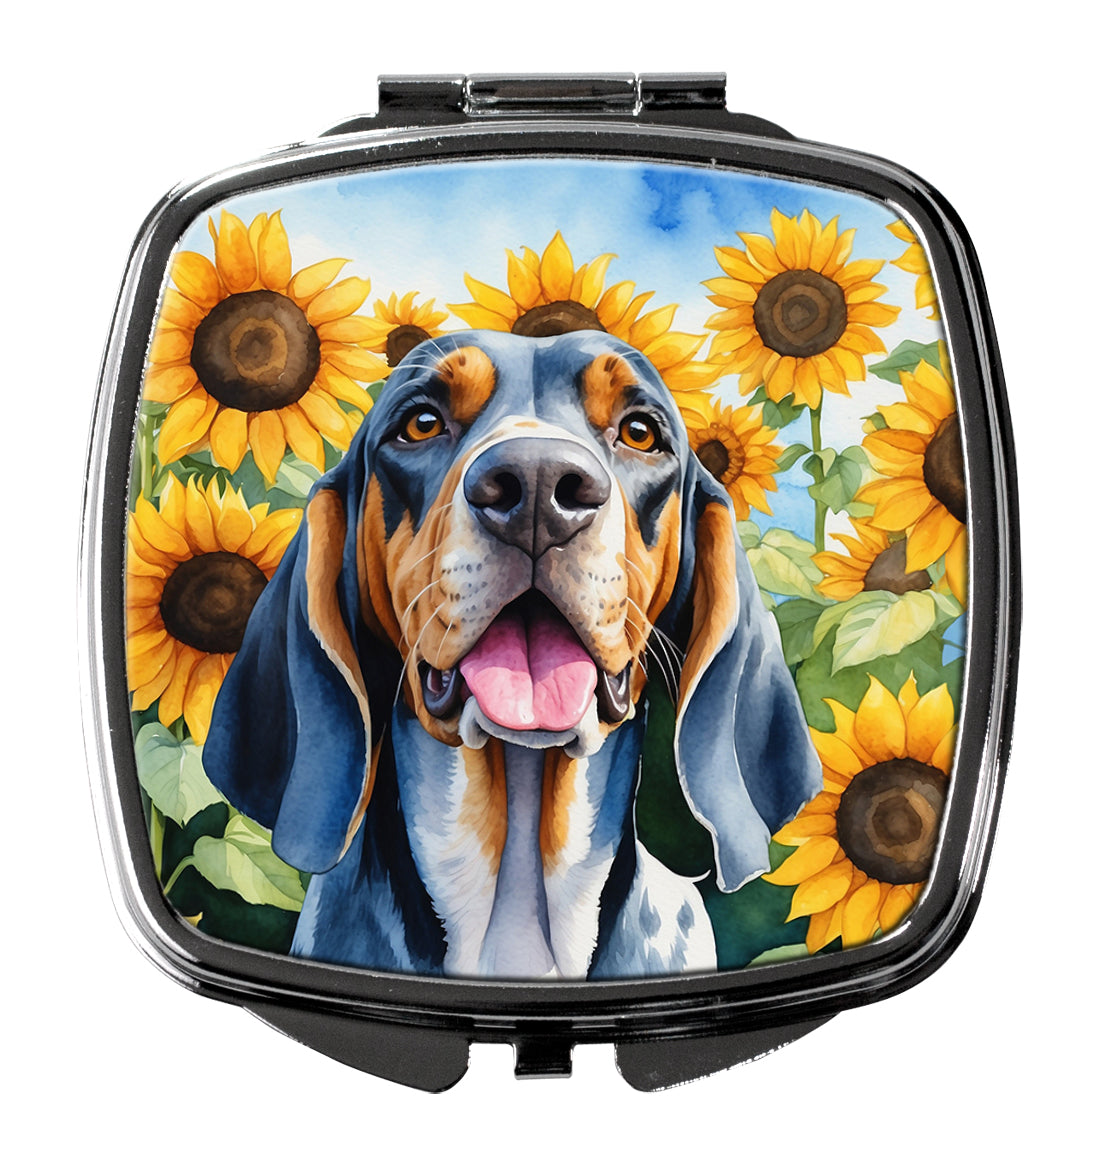 Buy this American English Coonhound in Sunflowers Compact Mirror